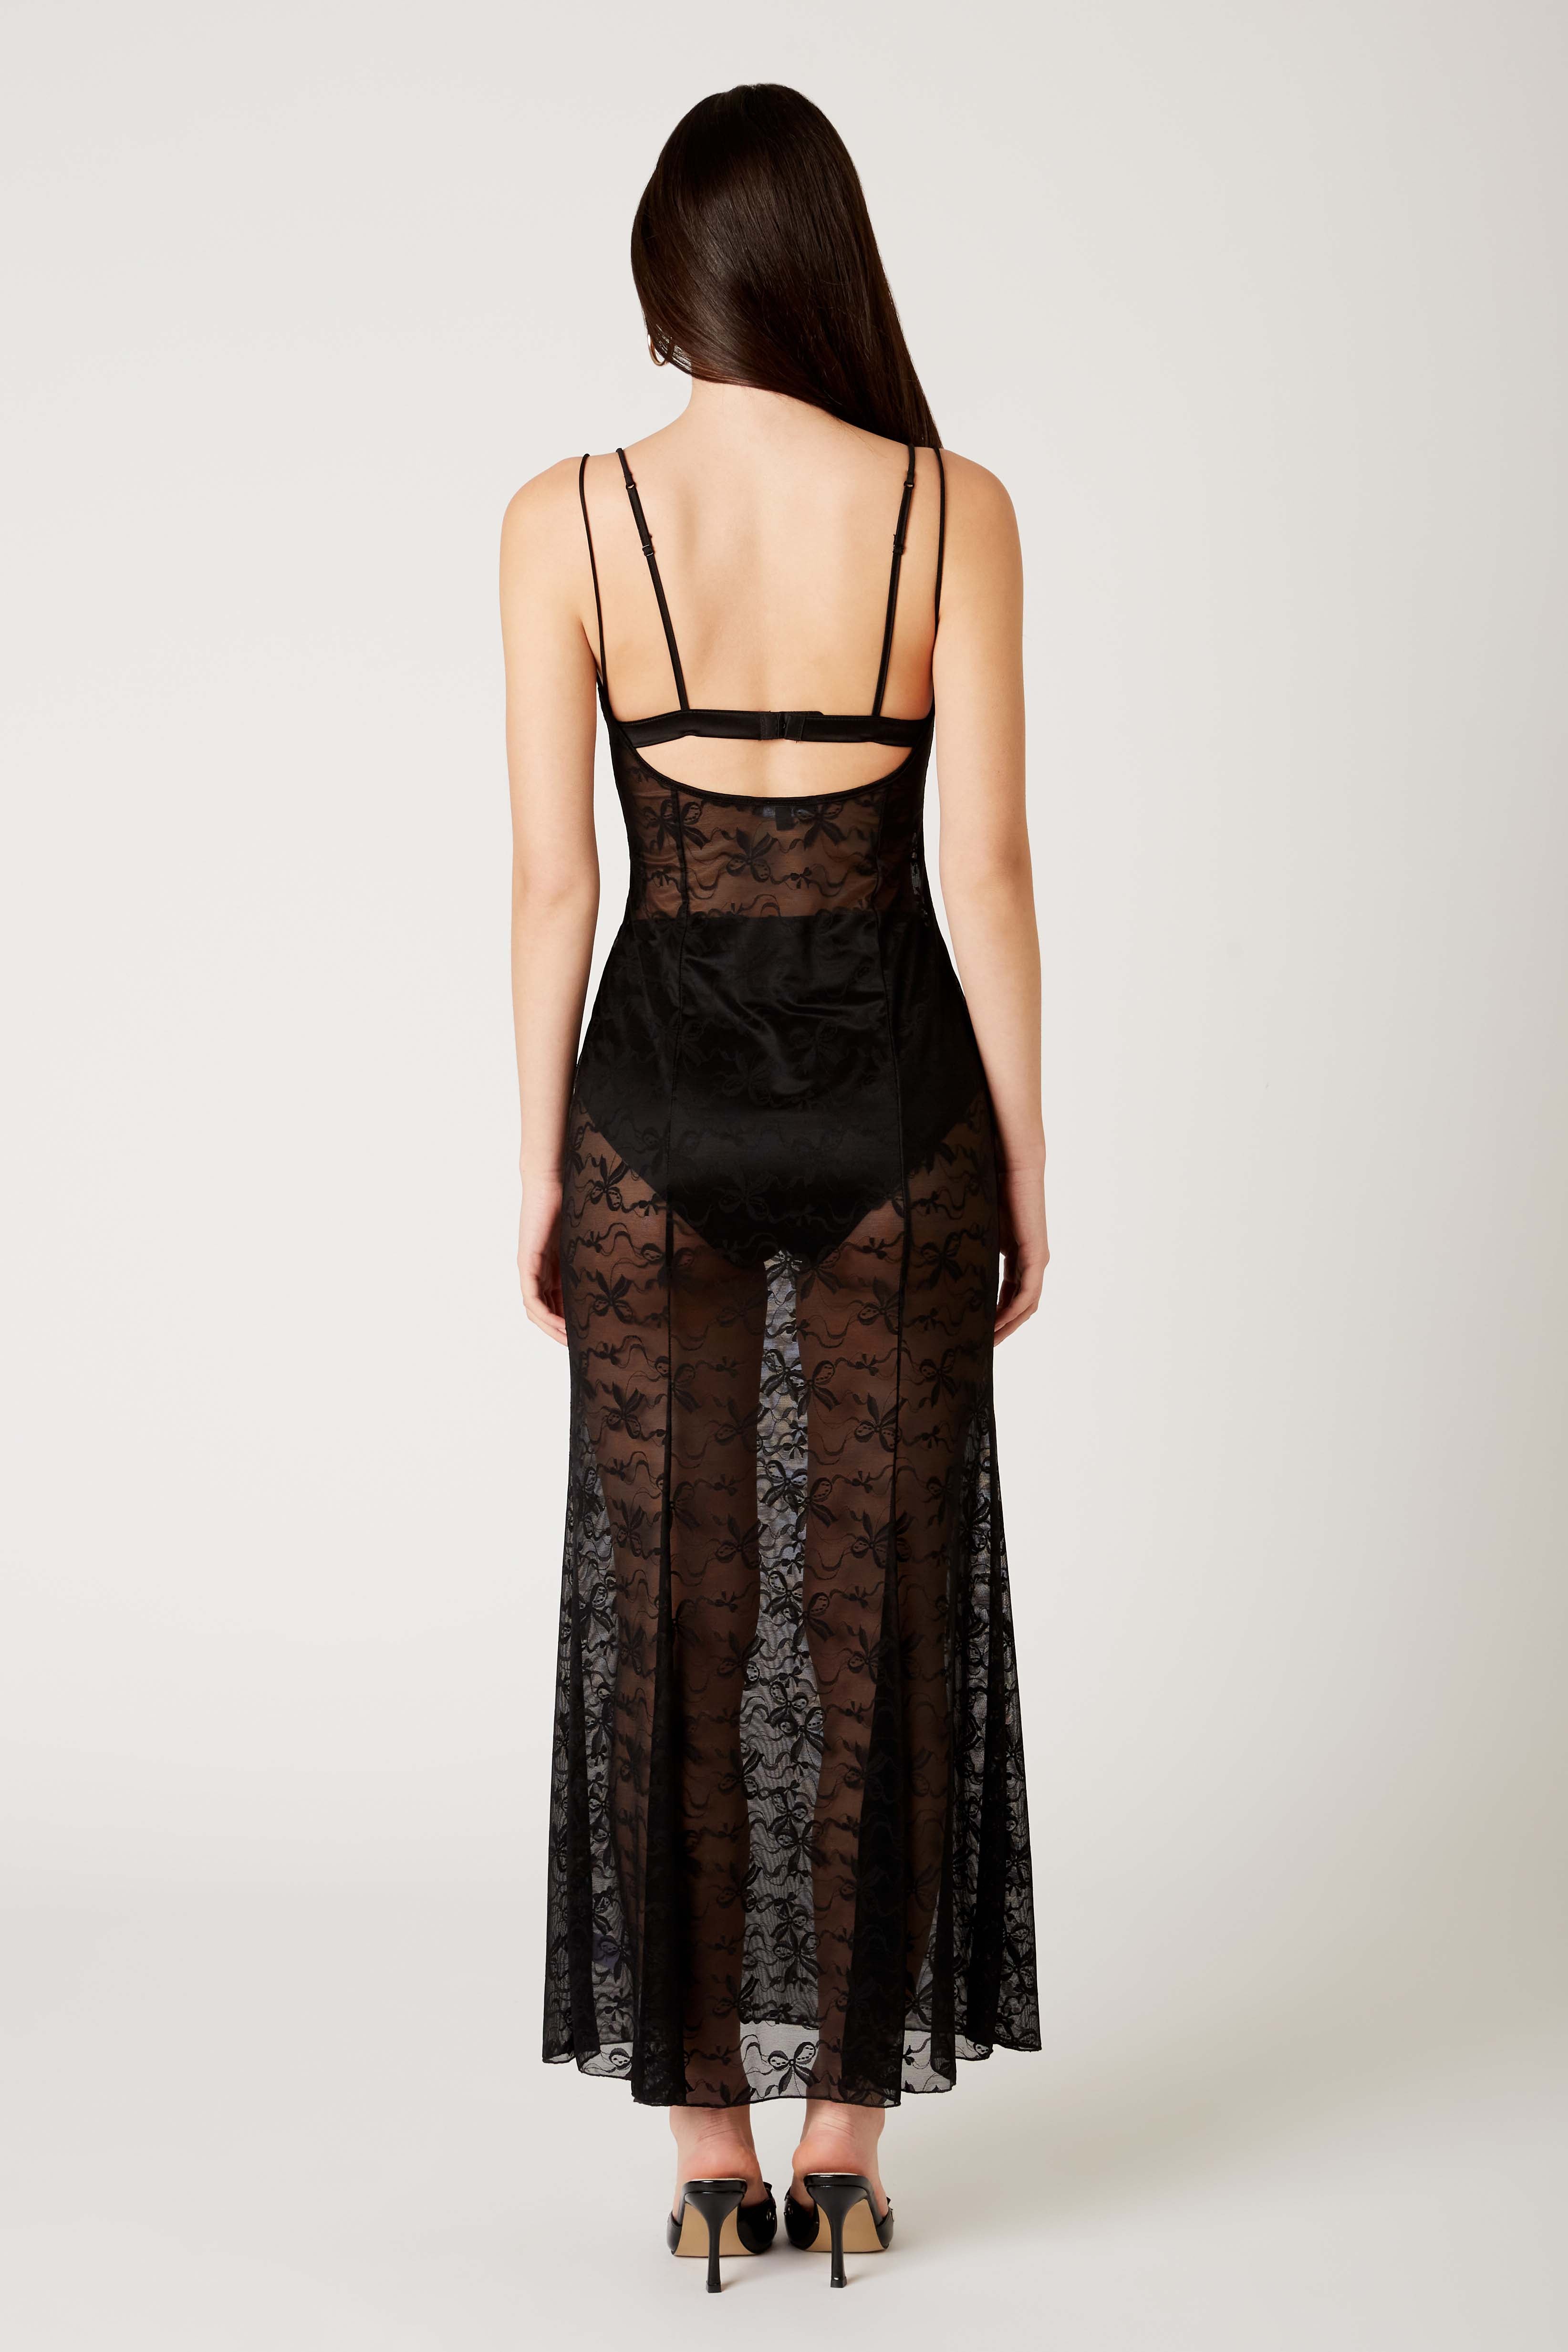 Lace Maxi Dress in black back view